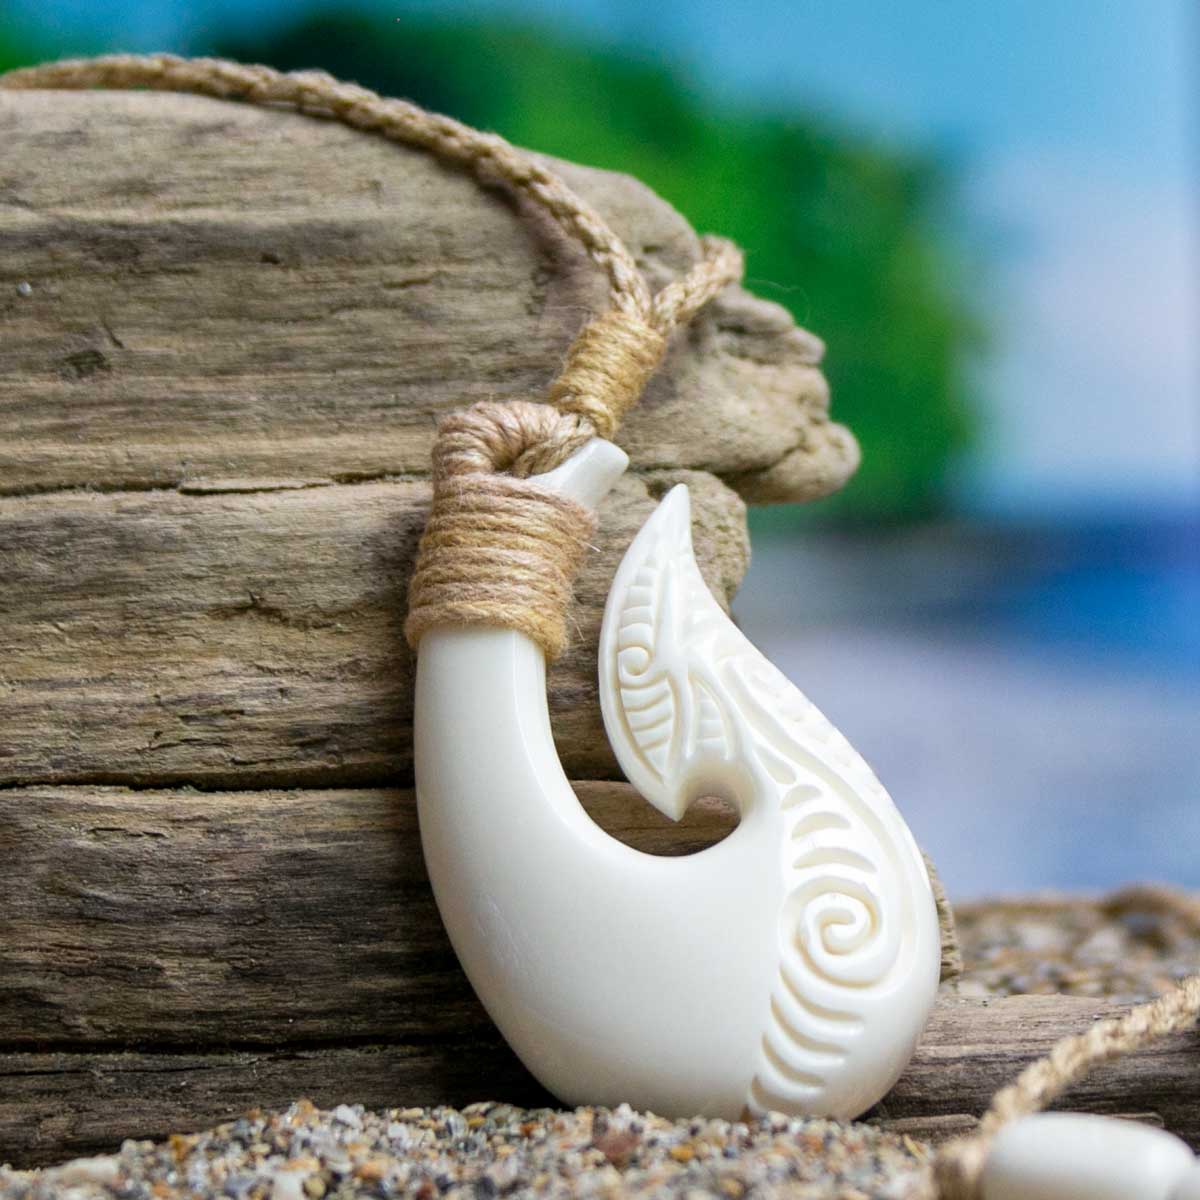 HEI Matau Fish Hook Necklace - Hand Carved Necklace - from Bali Necklaces